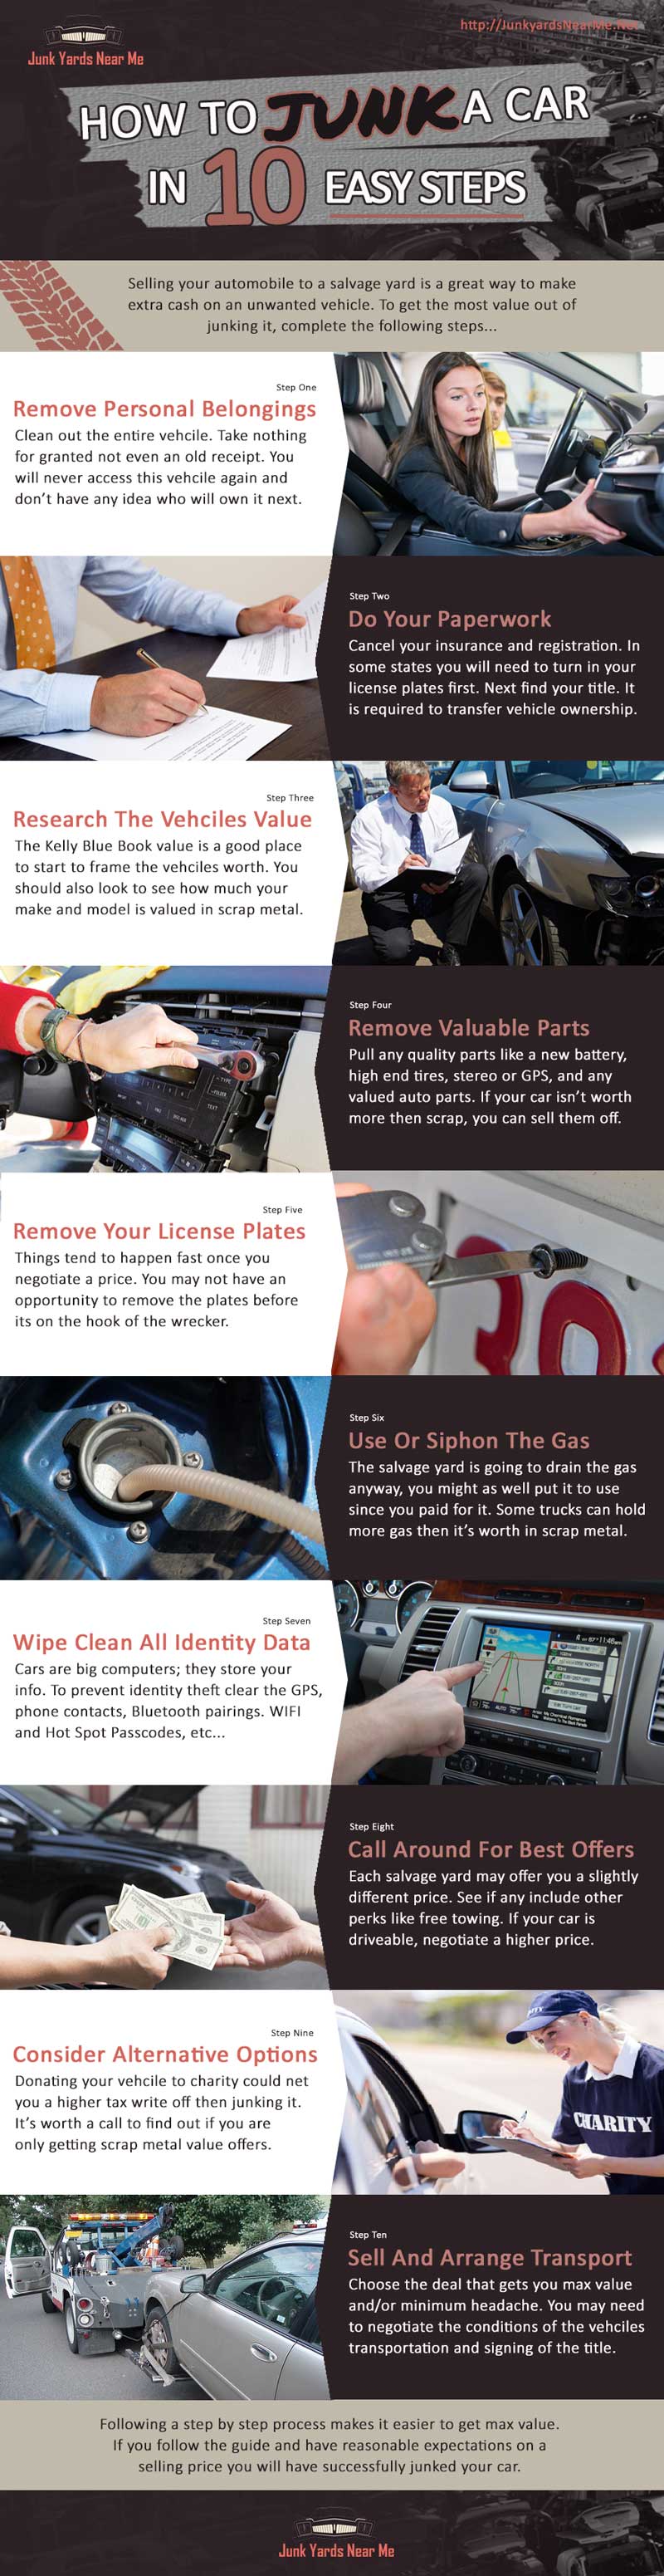 How to Junk a Car in 10 Easy Steps